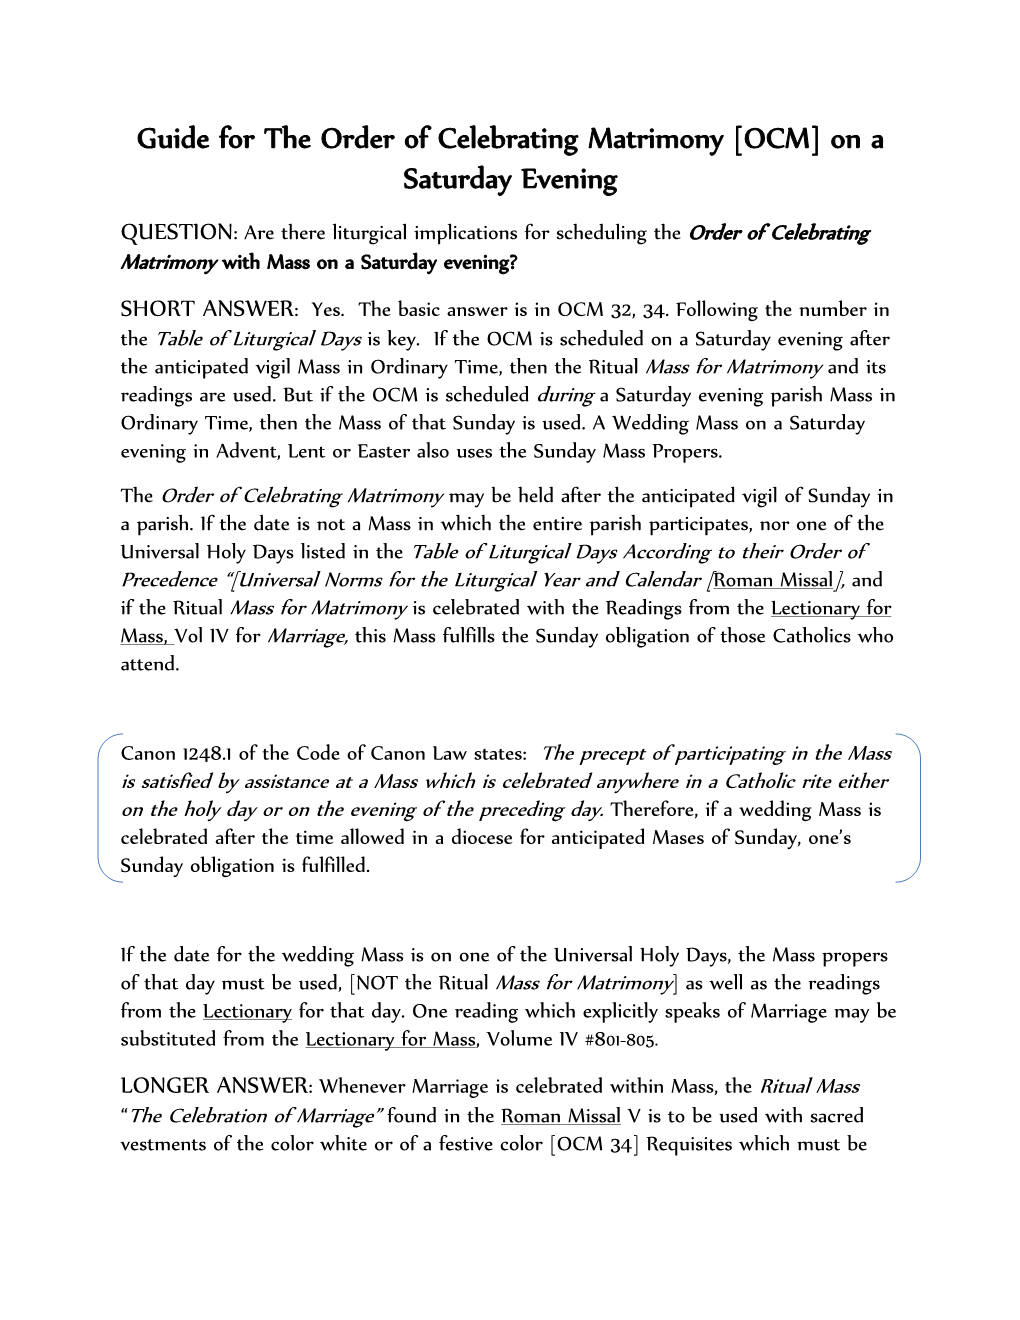 Guide for the Order of Celebrating Matrimony [OCM] on a Saturday Evening